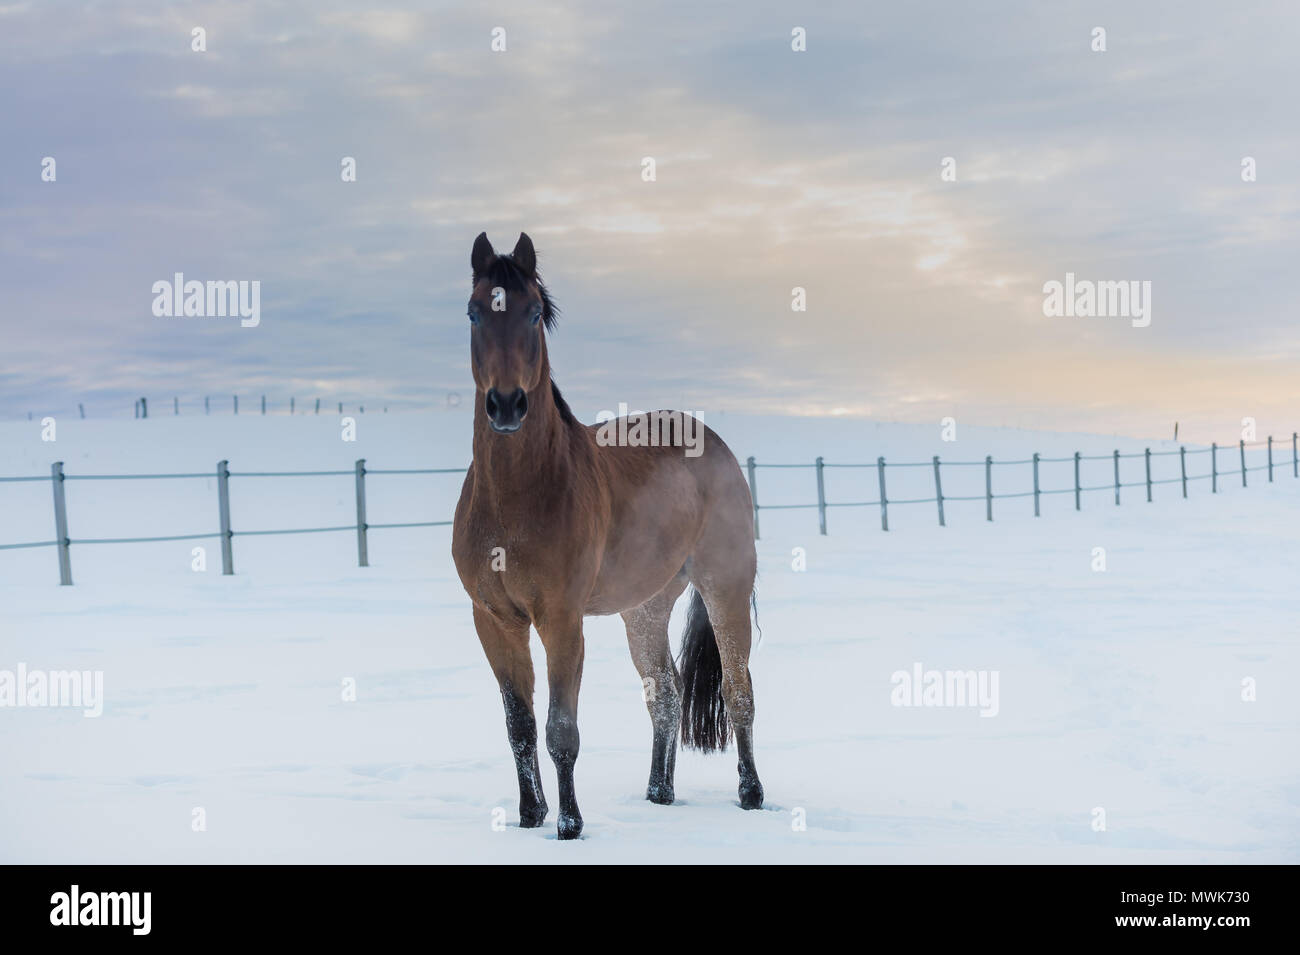 A dark brown breed horse stands in white snowy landscape. Winter's day comes to an end and the sky shows a bright sunset. Beautiful winter picture. Stock Photo